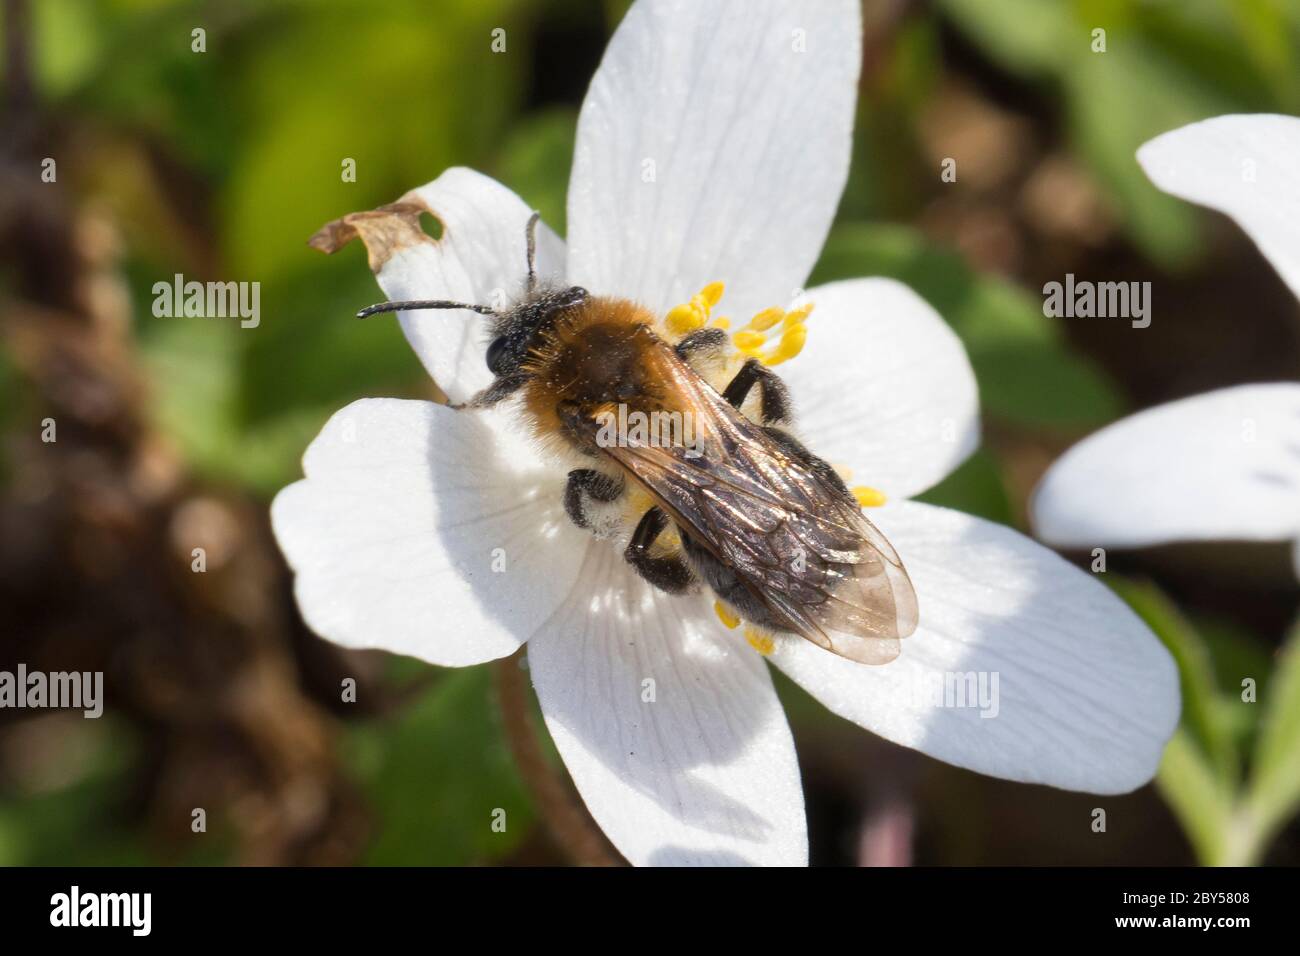 Mining-Bee (Andrena spec.), visiting a flower of a wood anemone, Anemone nemorosa, Germany Stock Photo